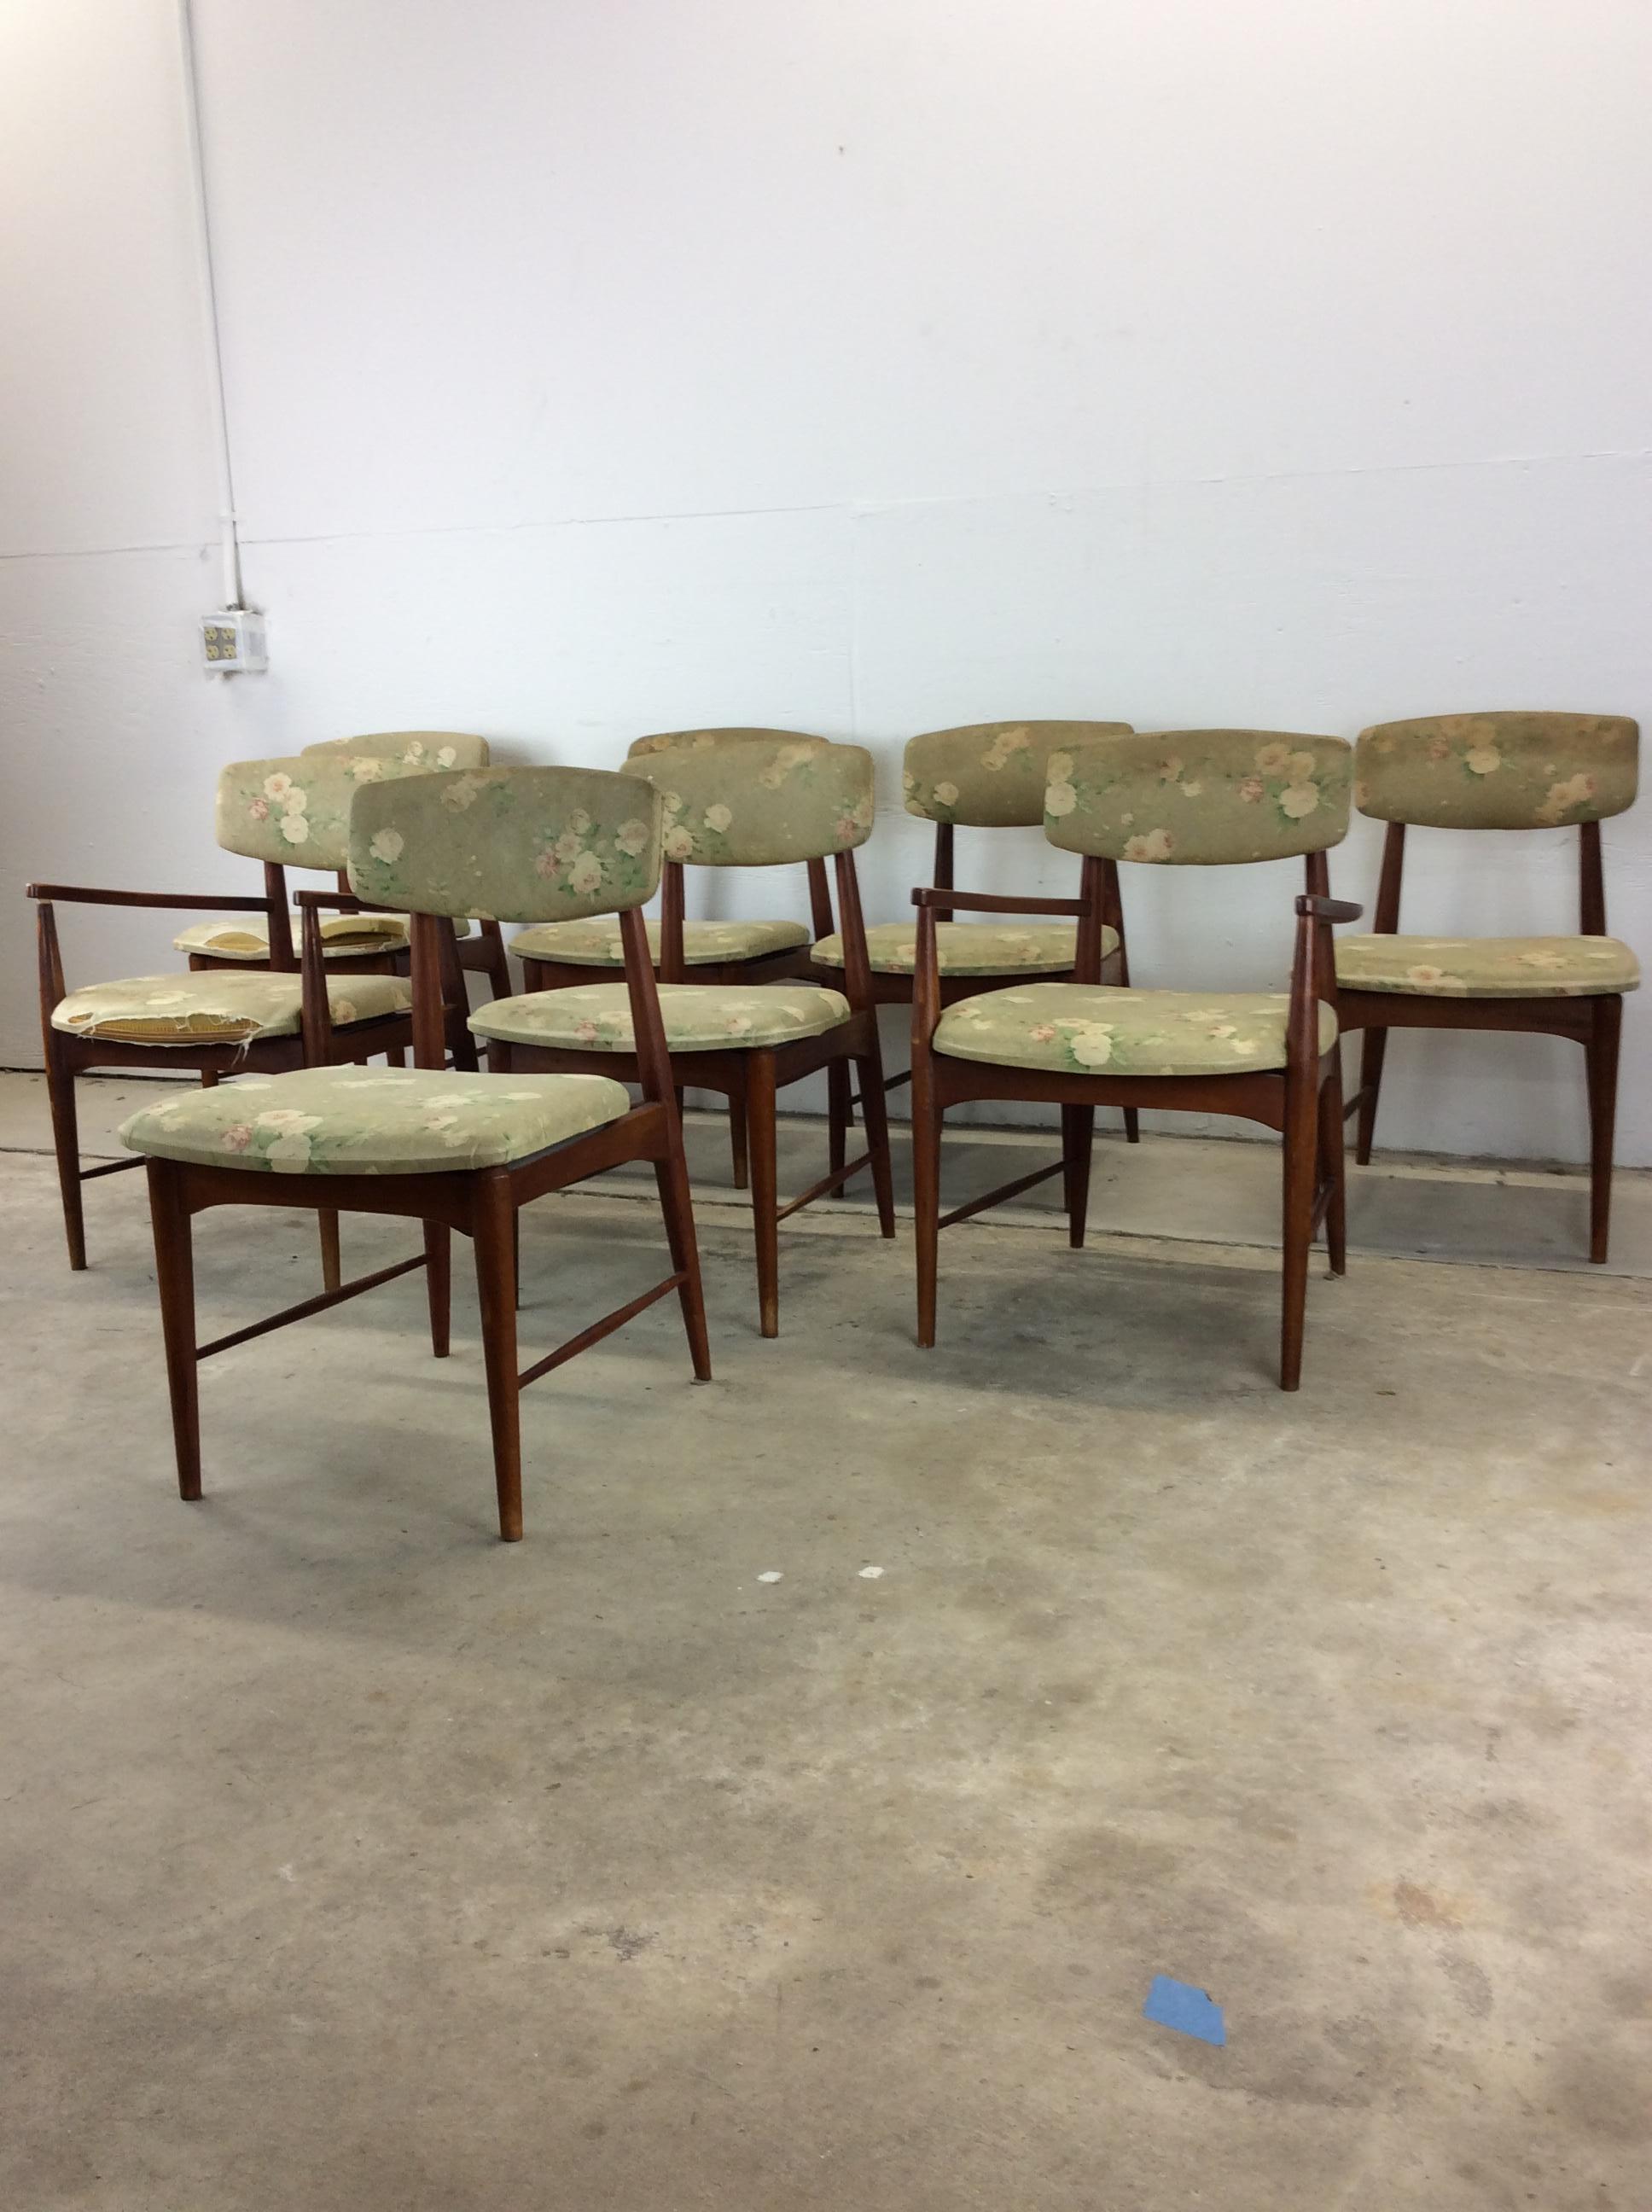 Set of 8 Mid Century Modern Dining Room Chairs with Vintage Upholstery In Good Condition For Sale In Freehold, NJ